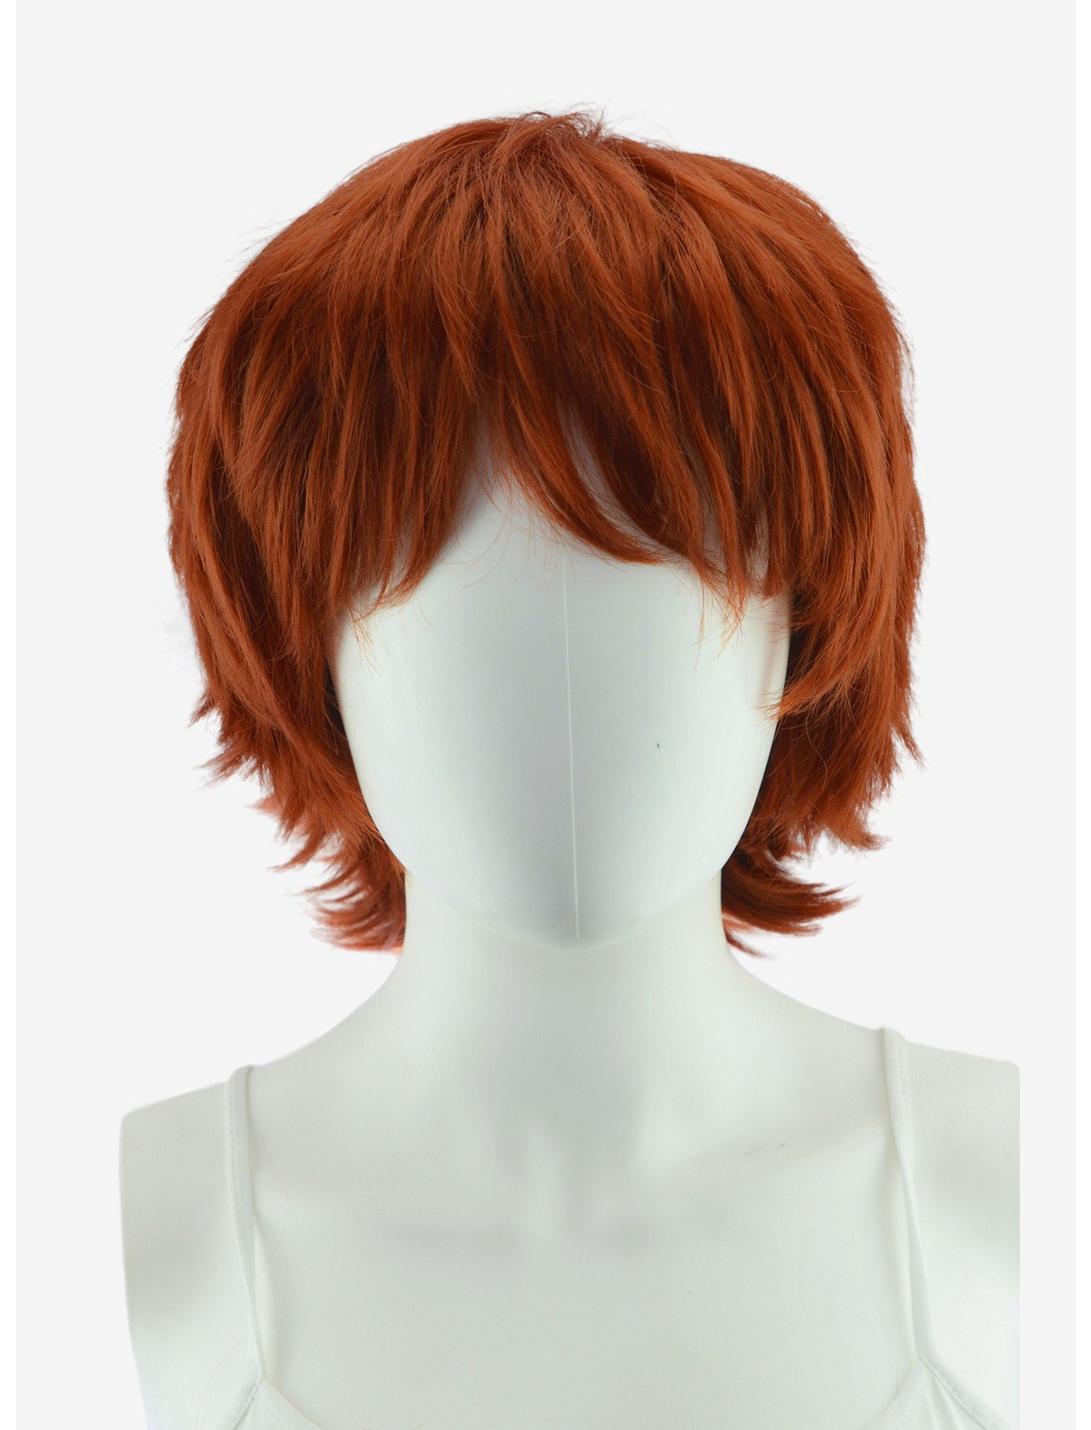 Epic Cosplay Apollo Copper Red Shaggy Wig for Spiking , , hi-res